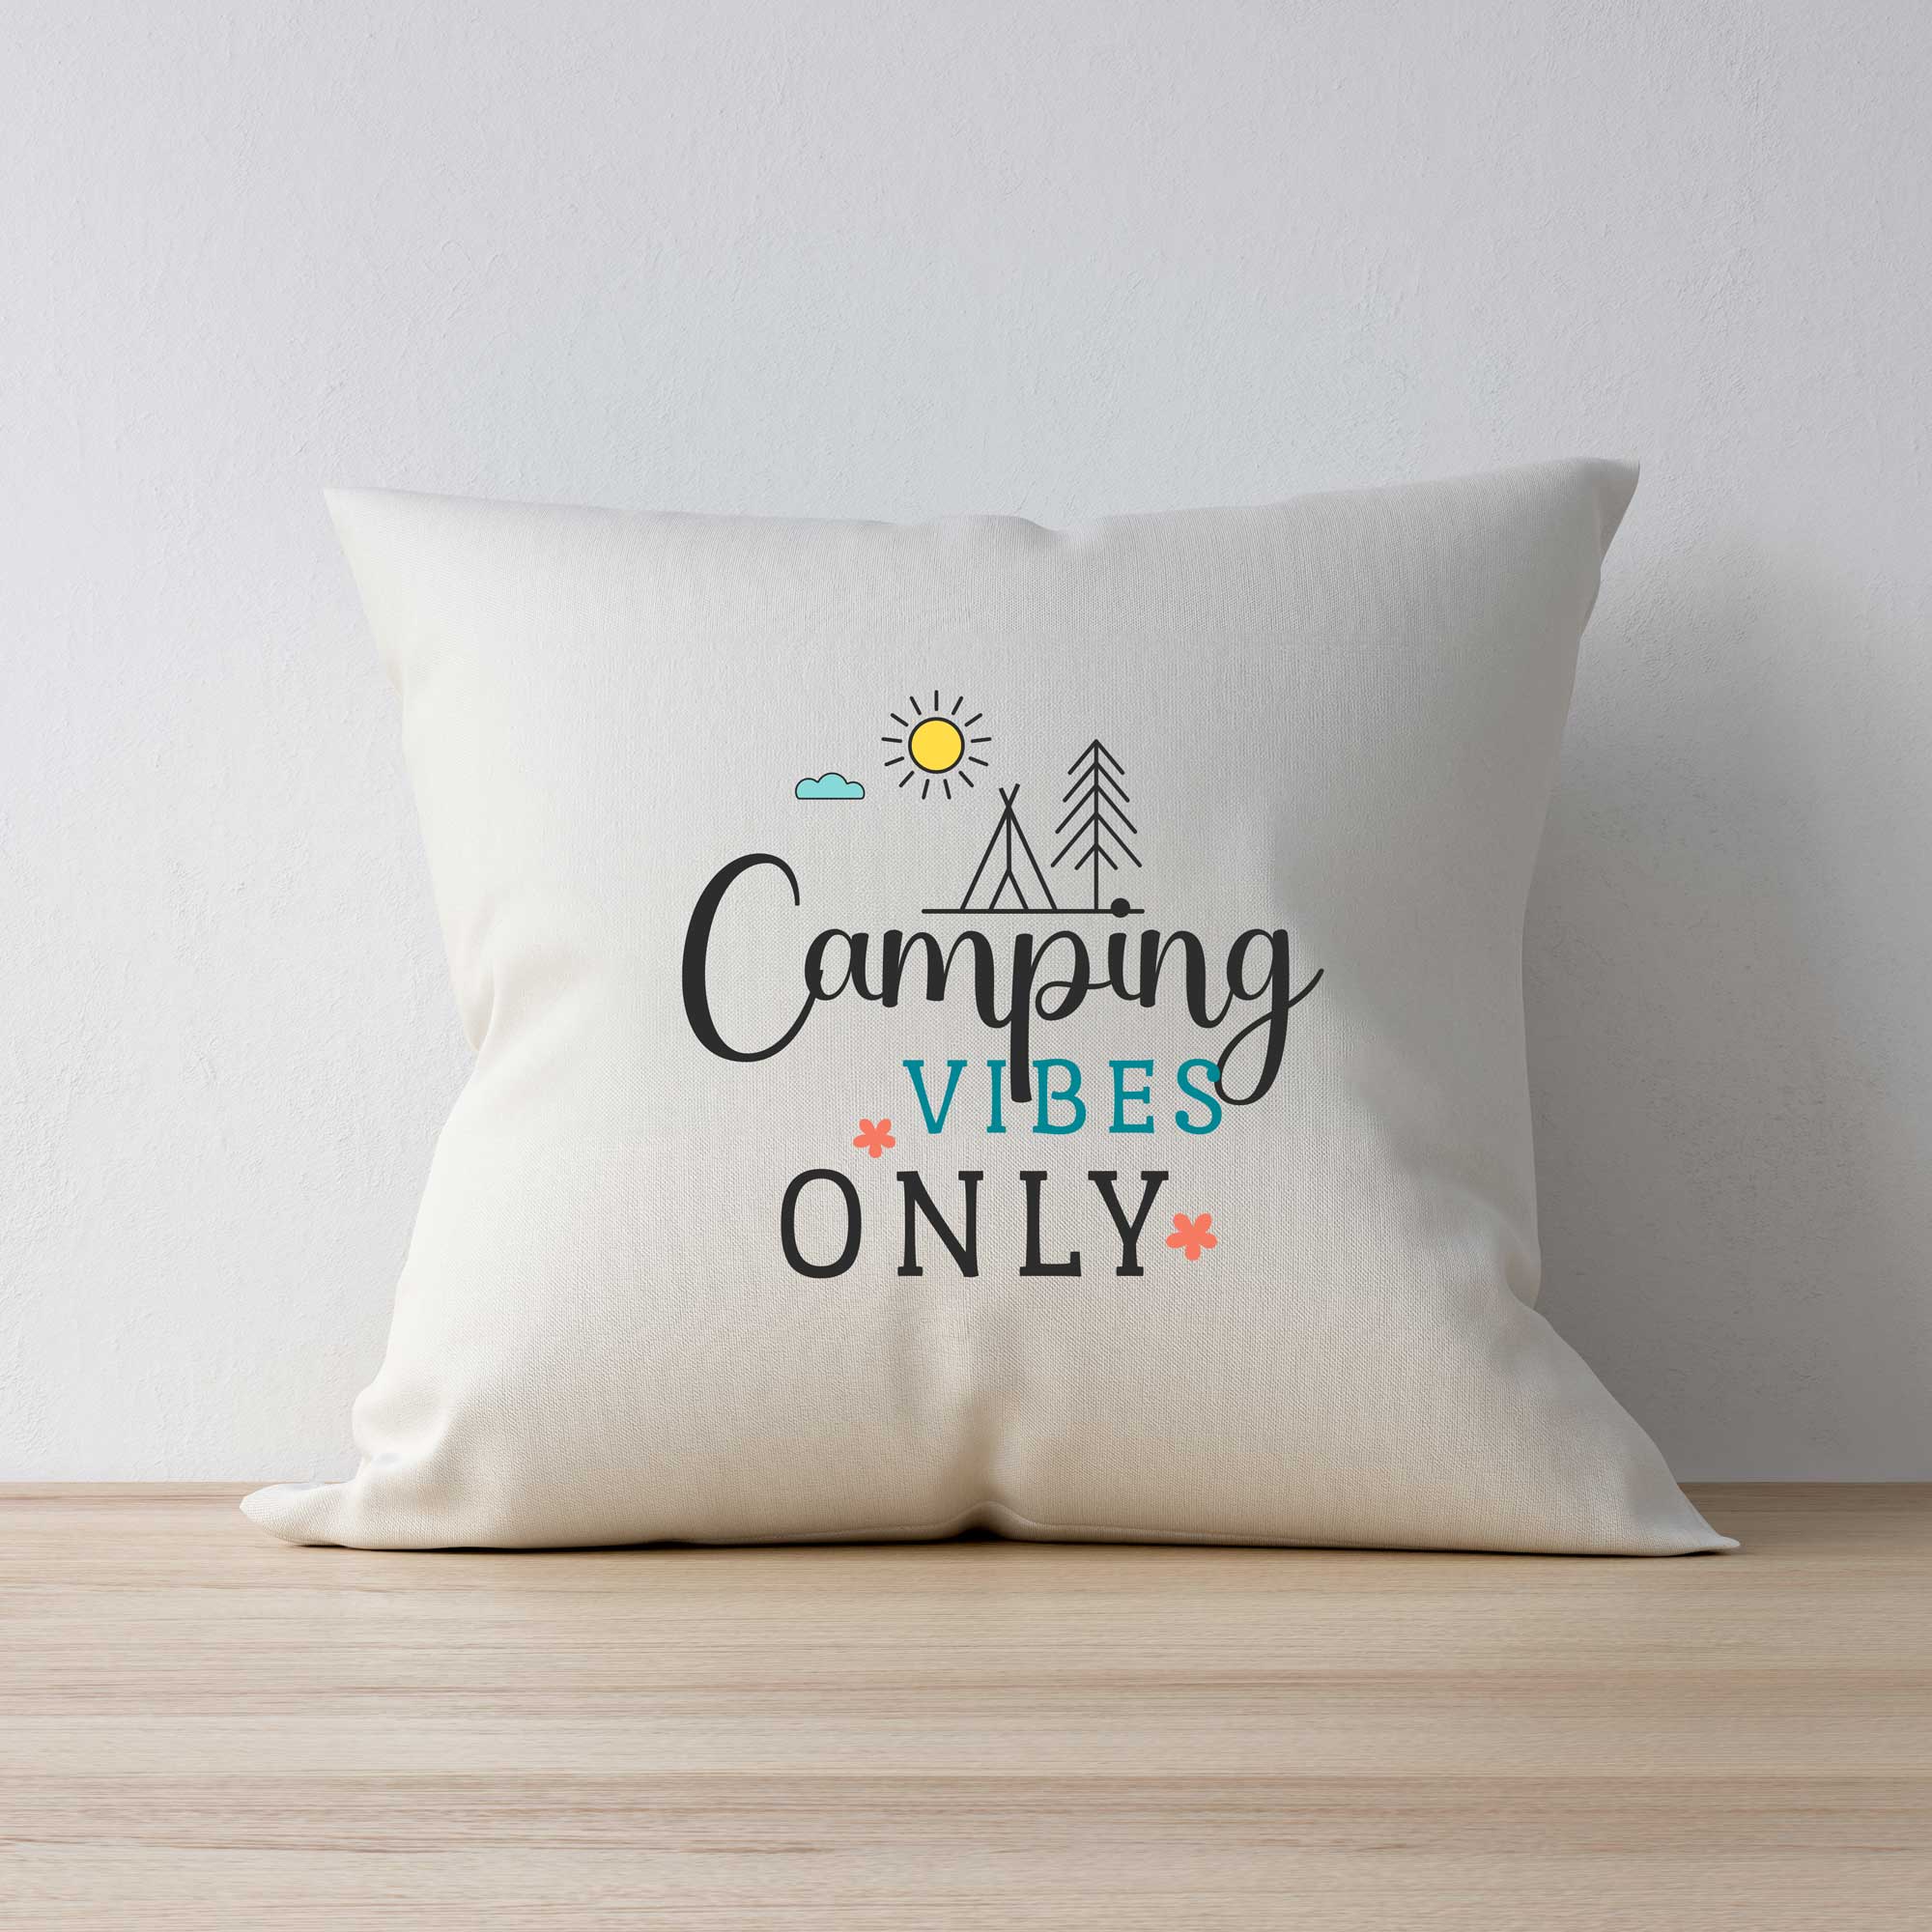 Camping pillow “Camping vibes only”